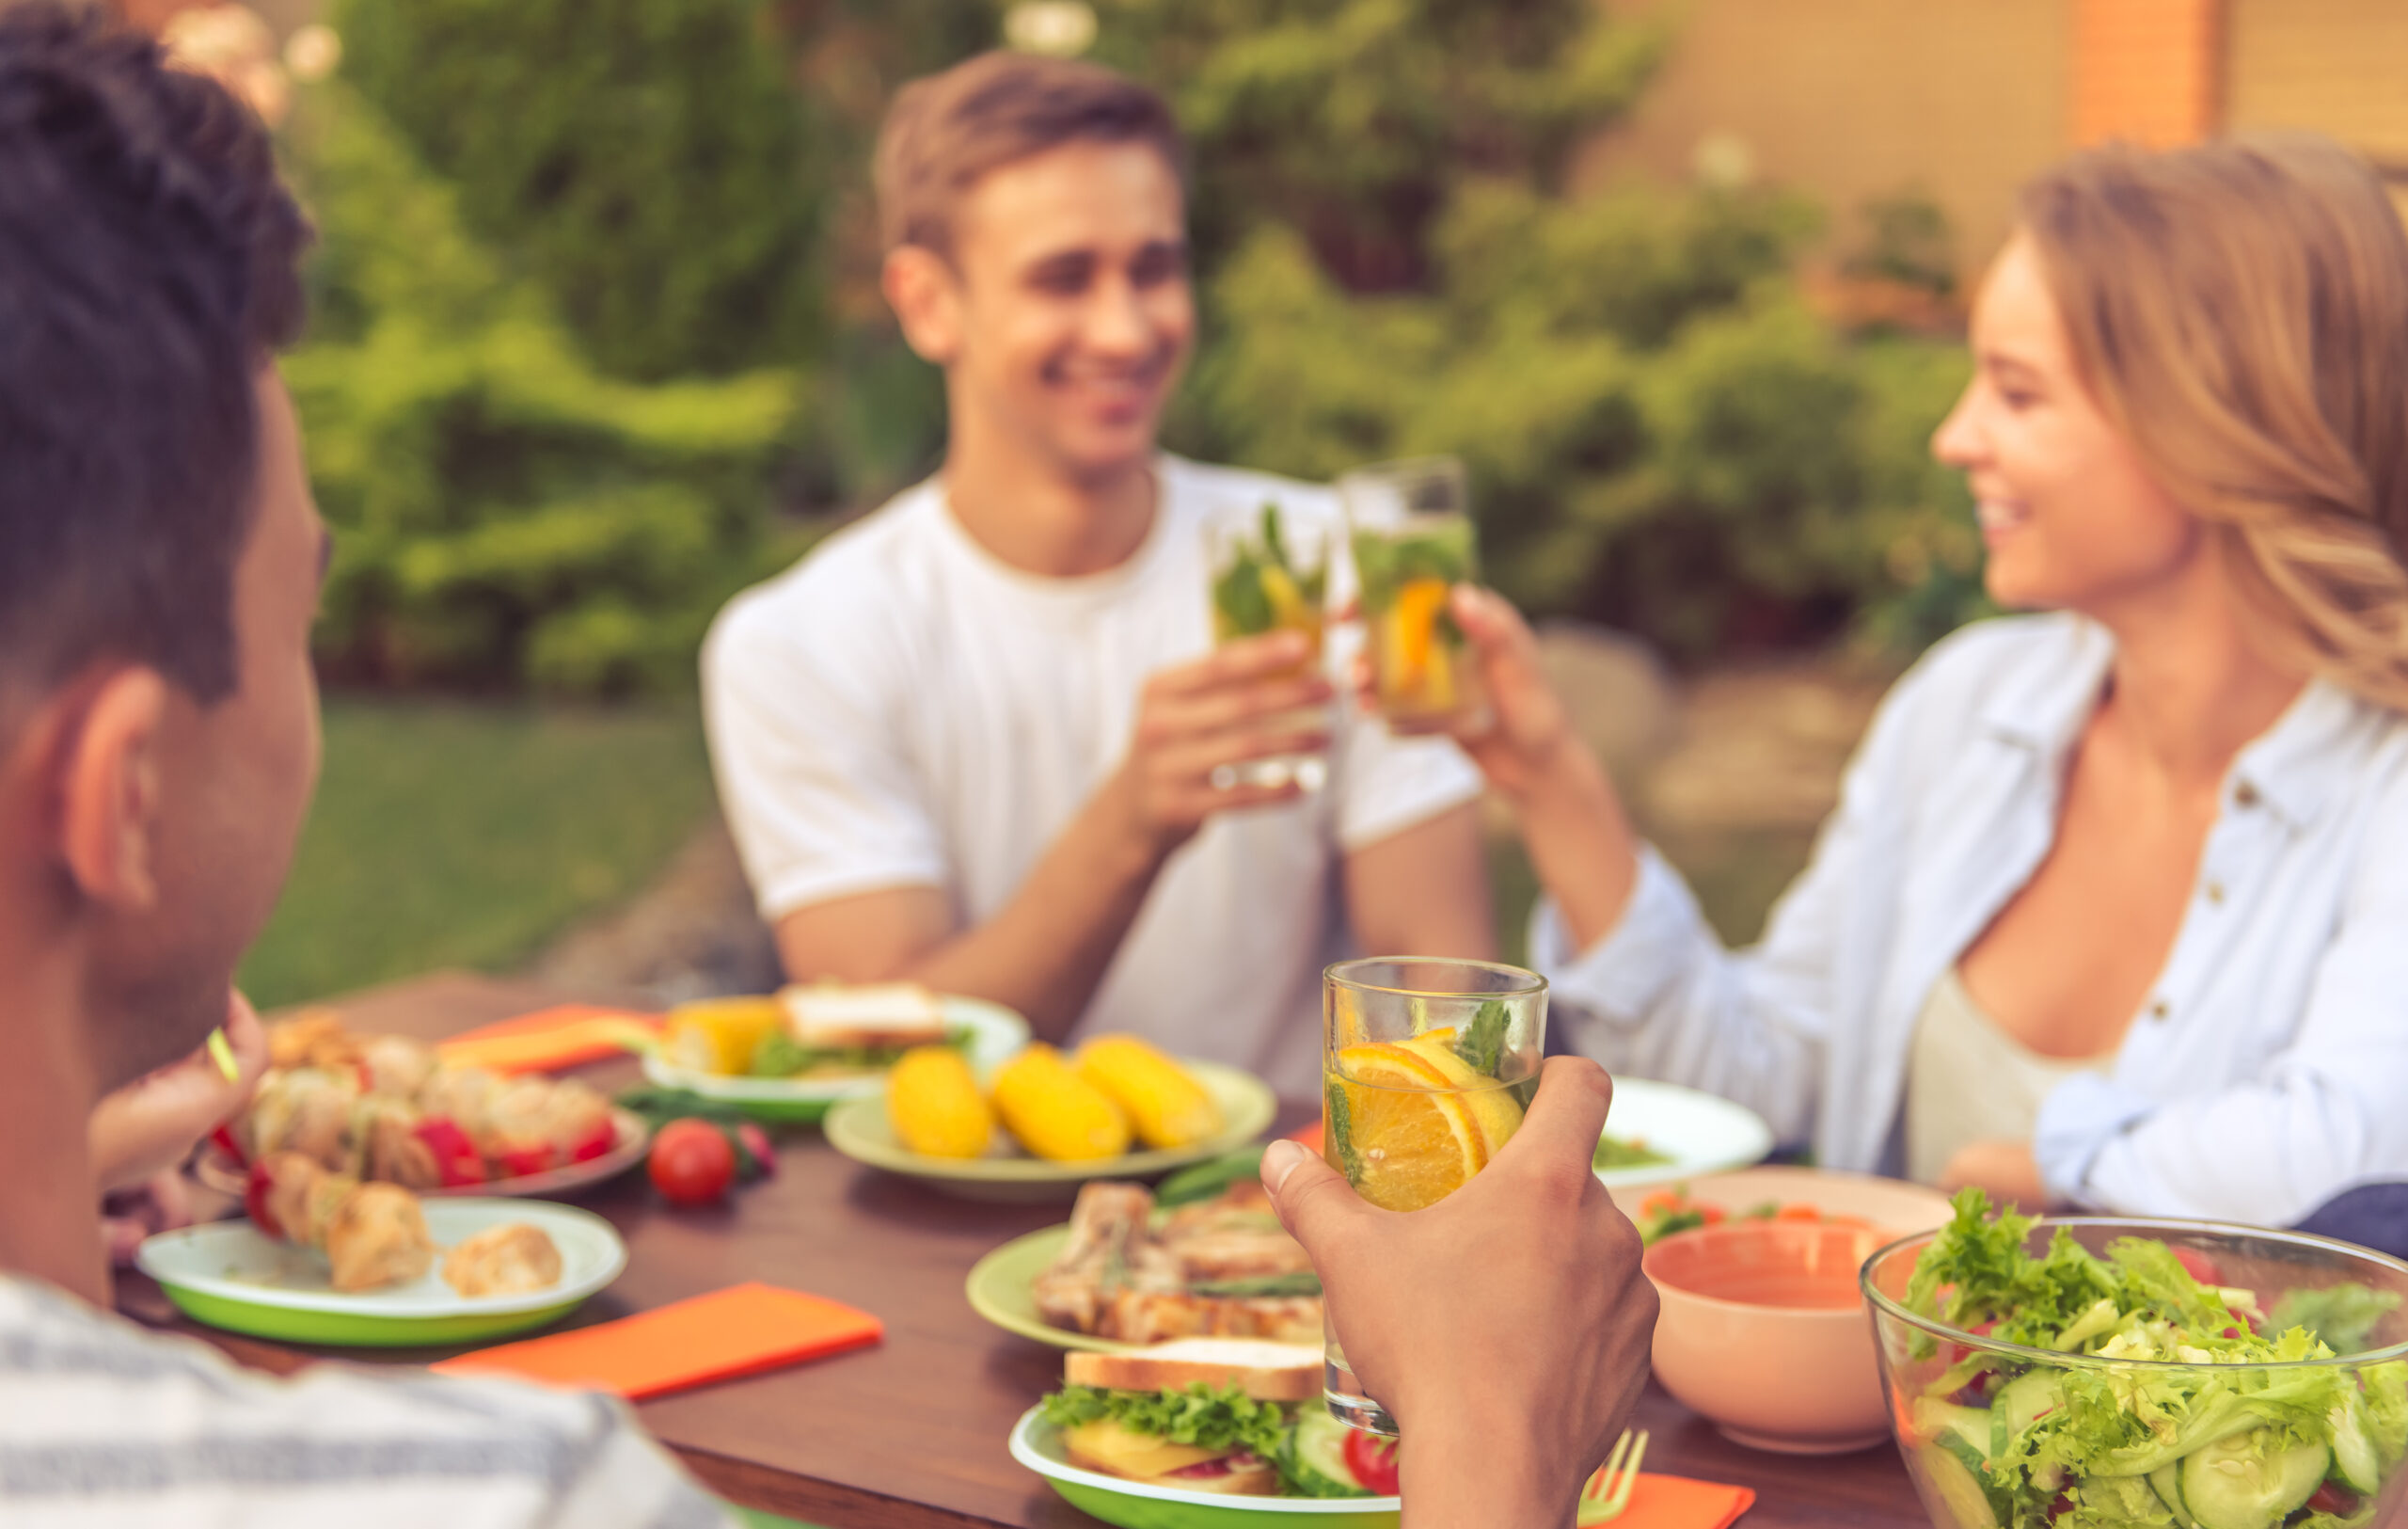 Young people are having picnic outdoors. Cropped image of young man holding a glass of lemonade while his friends are clinking glasses and smiling